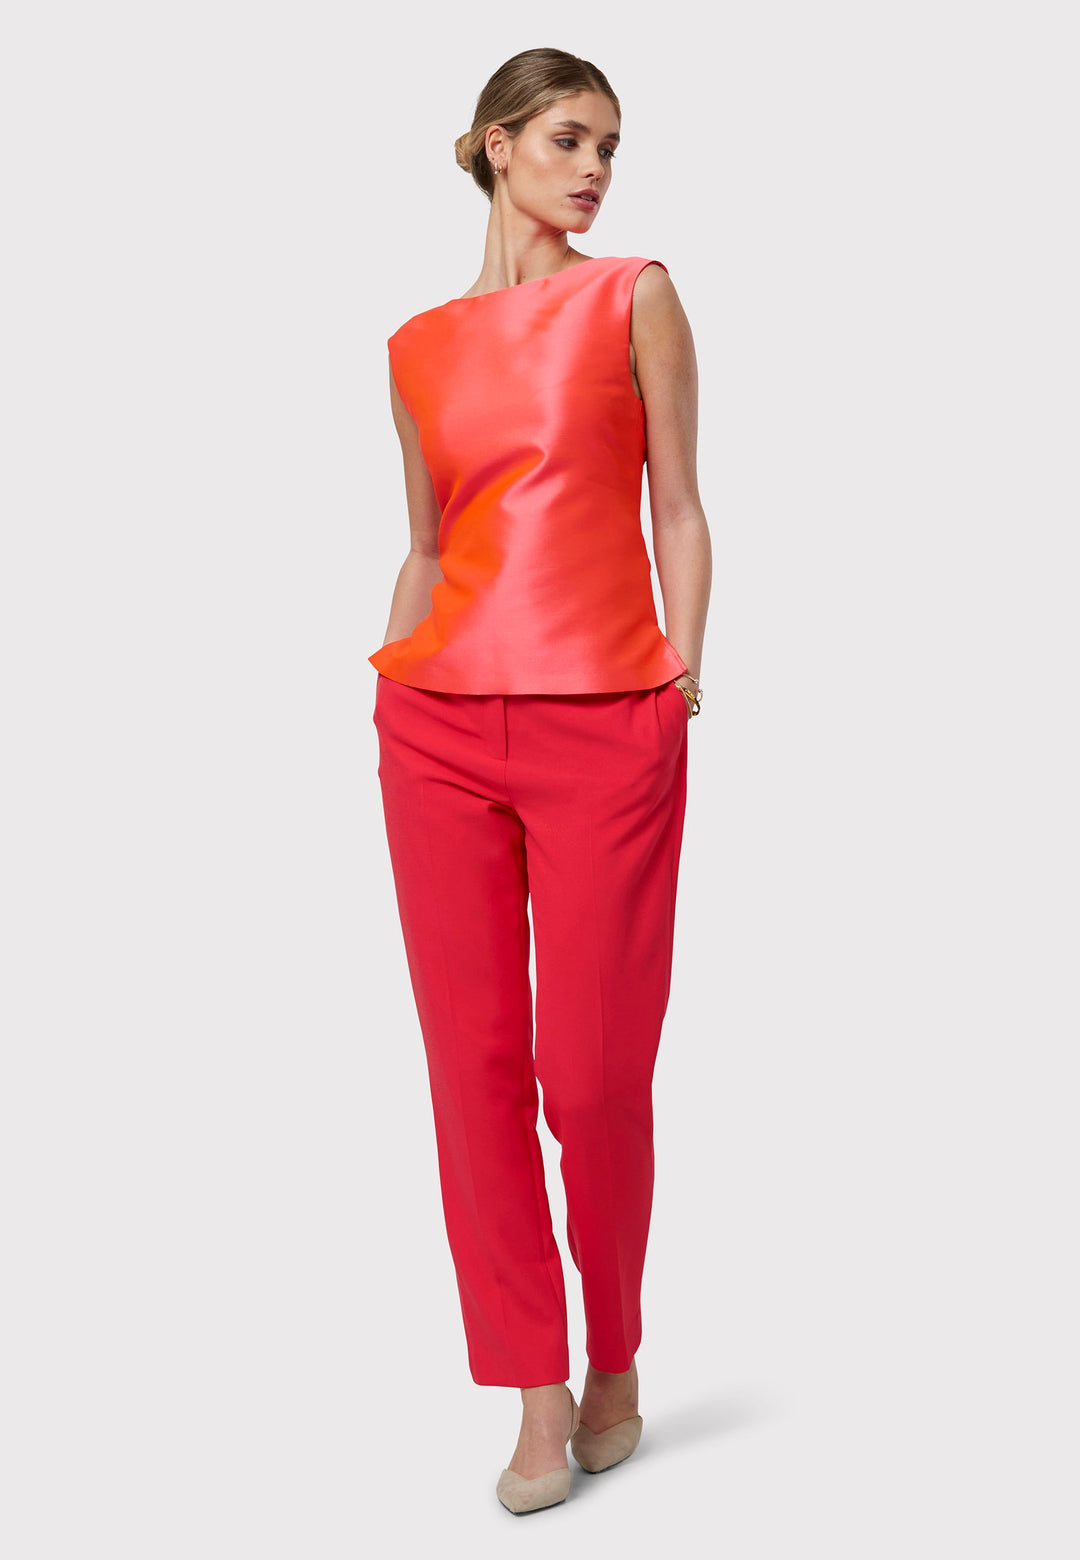 Stella Begonia Orange Top, a sleeveless foundation designed to complement our coordinating suiting or stand beautifully on its own. Boasting an iridescent sheen, this piece features two side slits and a central back zip. Embrace the vibrancy of spring with its captivating hue and playful elegance.